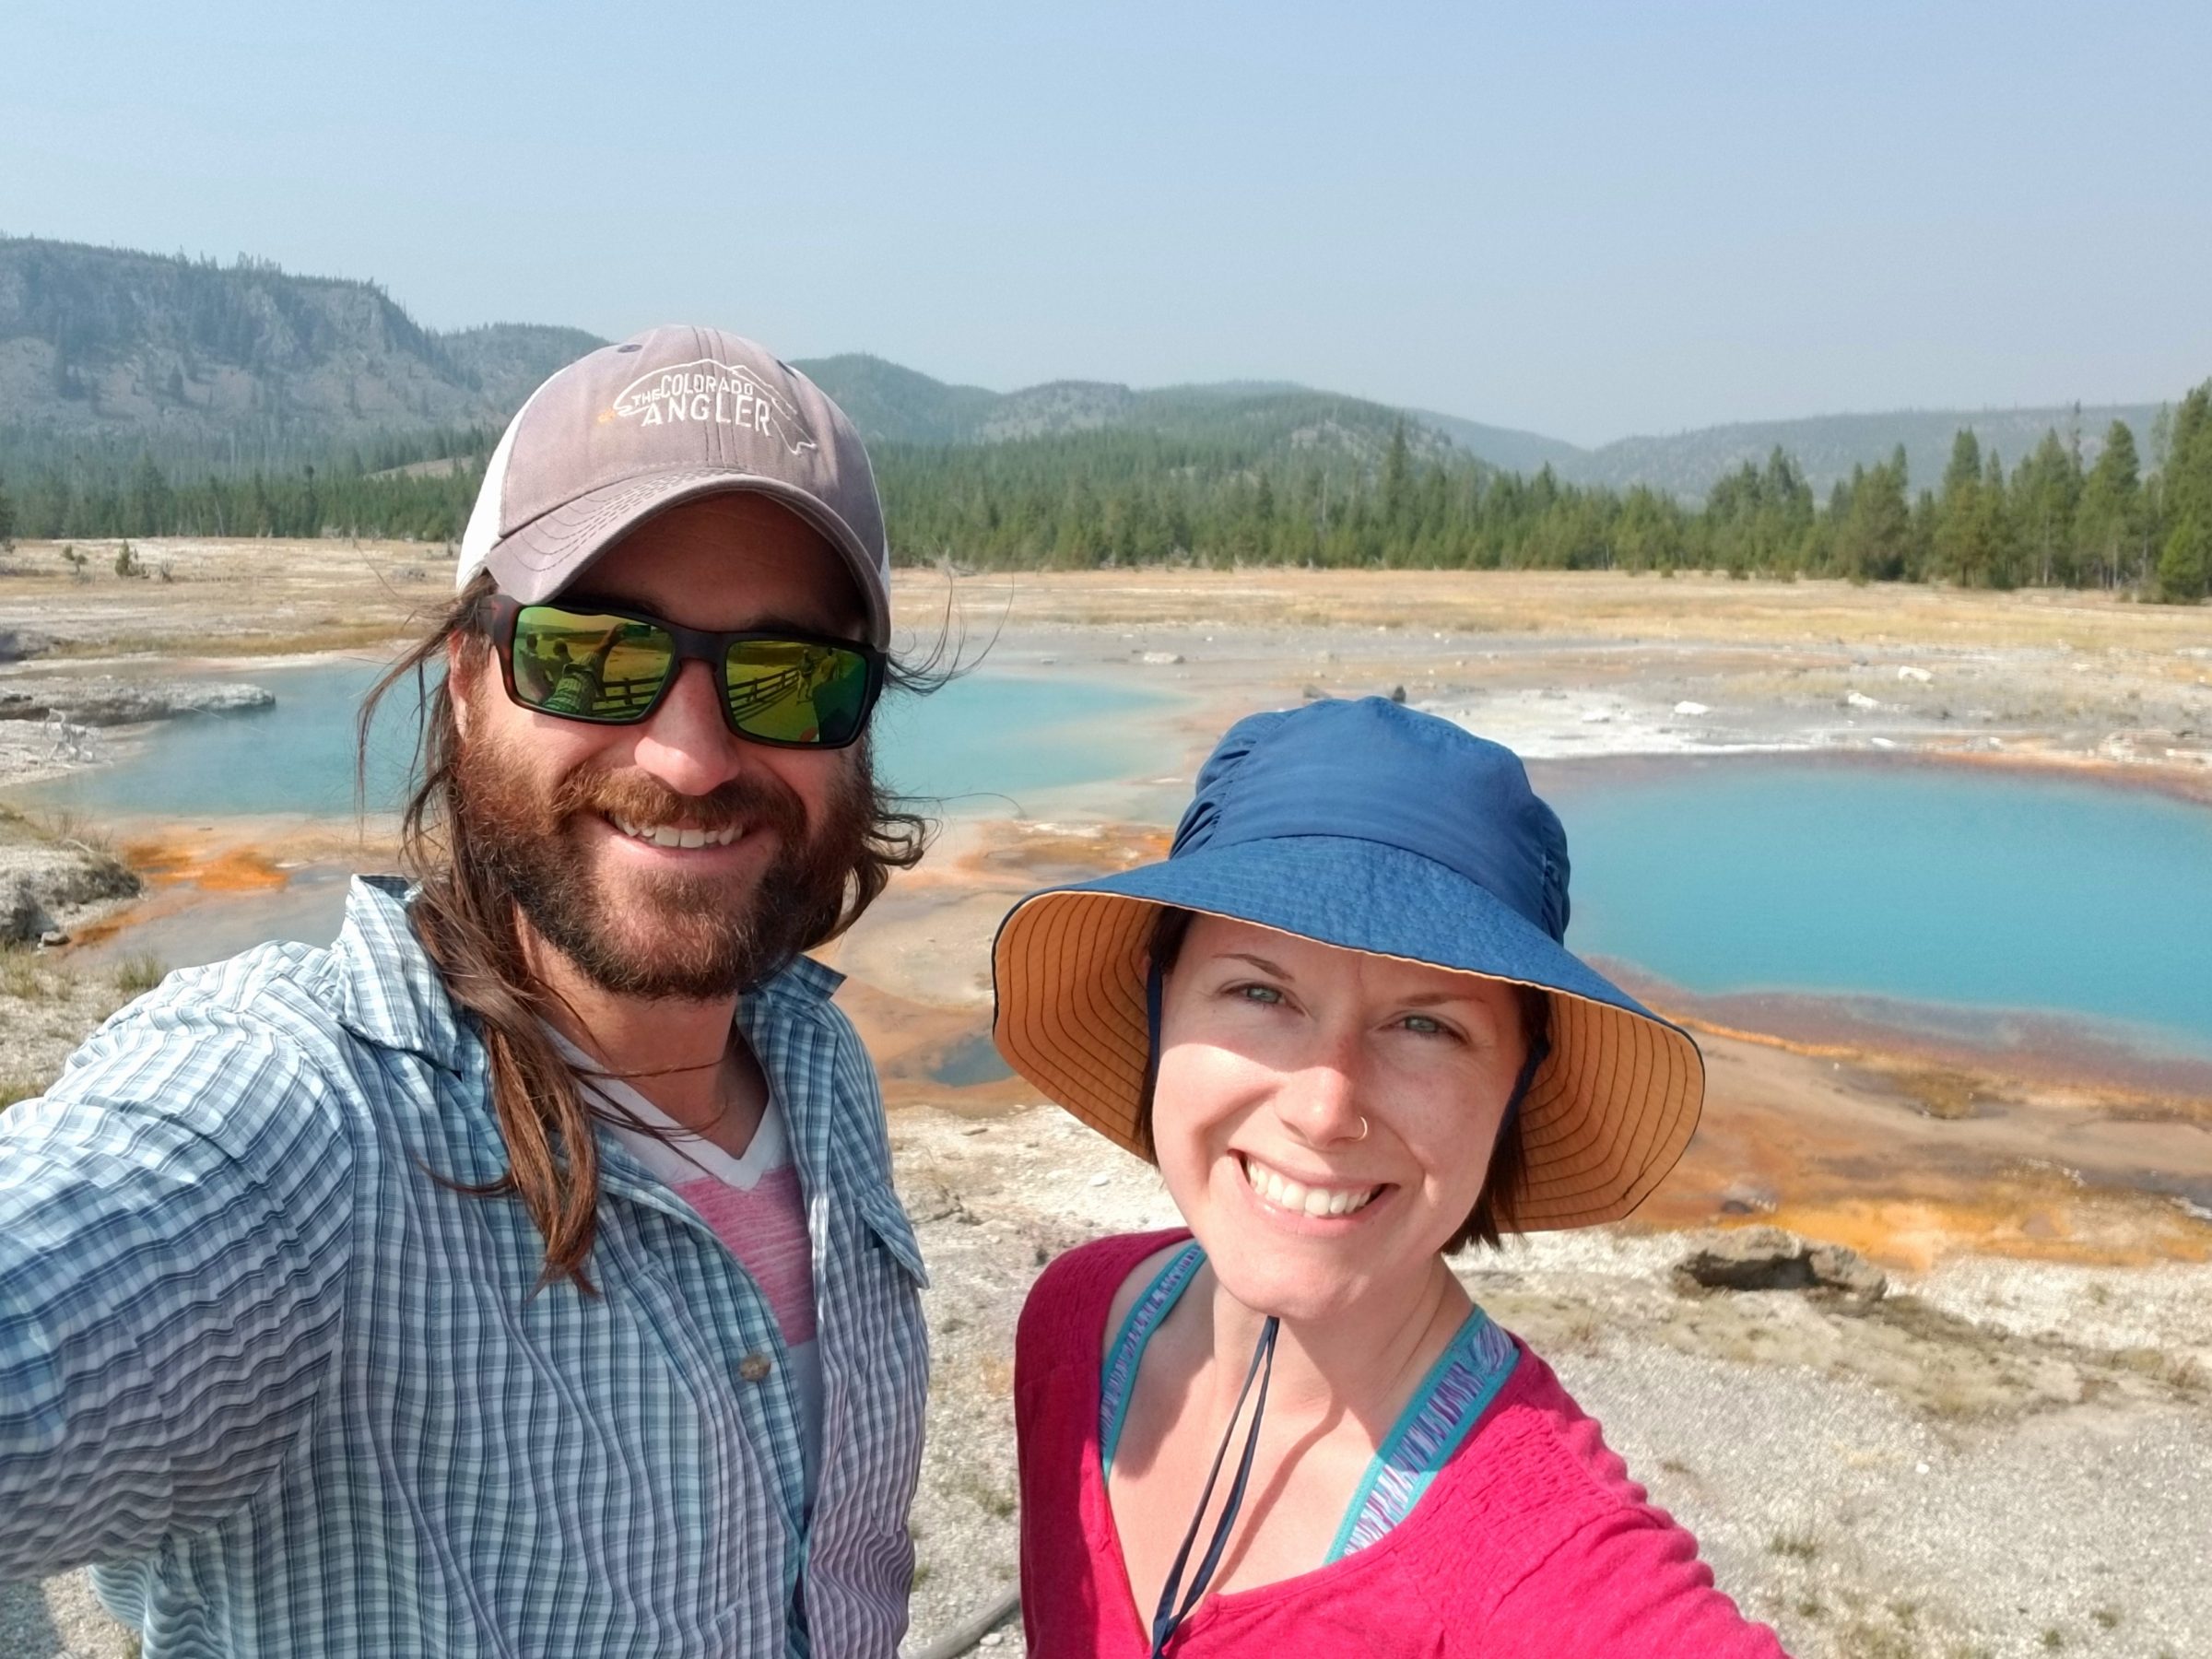 The Practical Vagabonds explore geothermal features in Yellowstone National Park